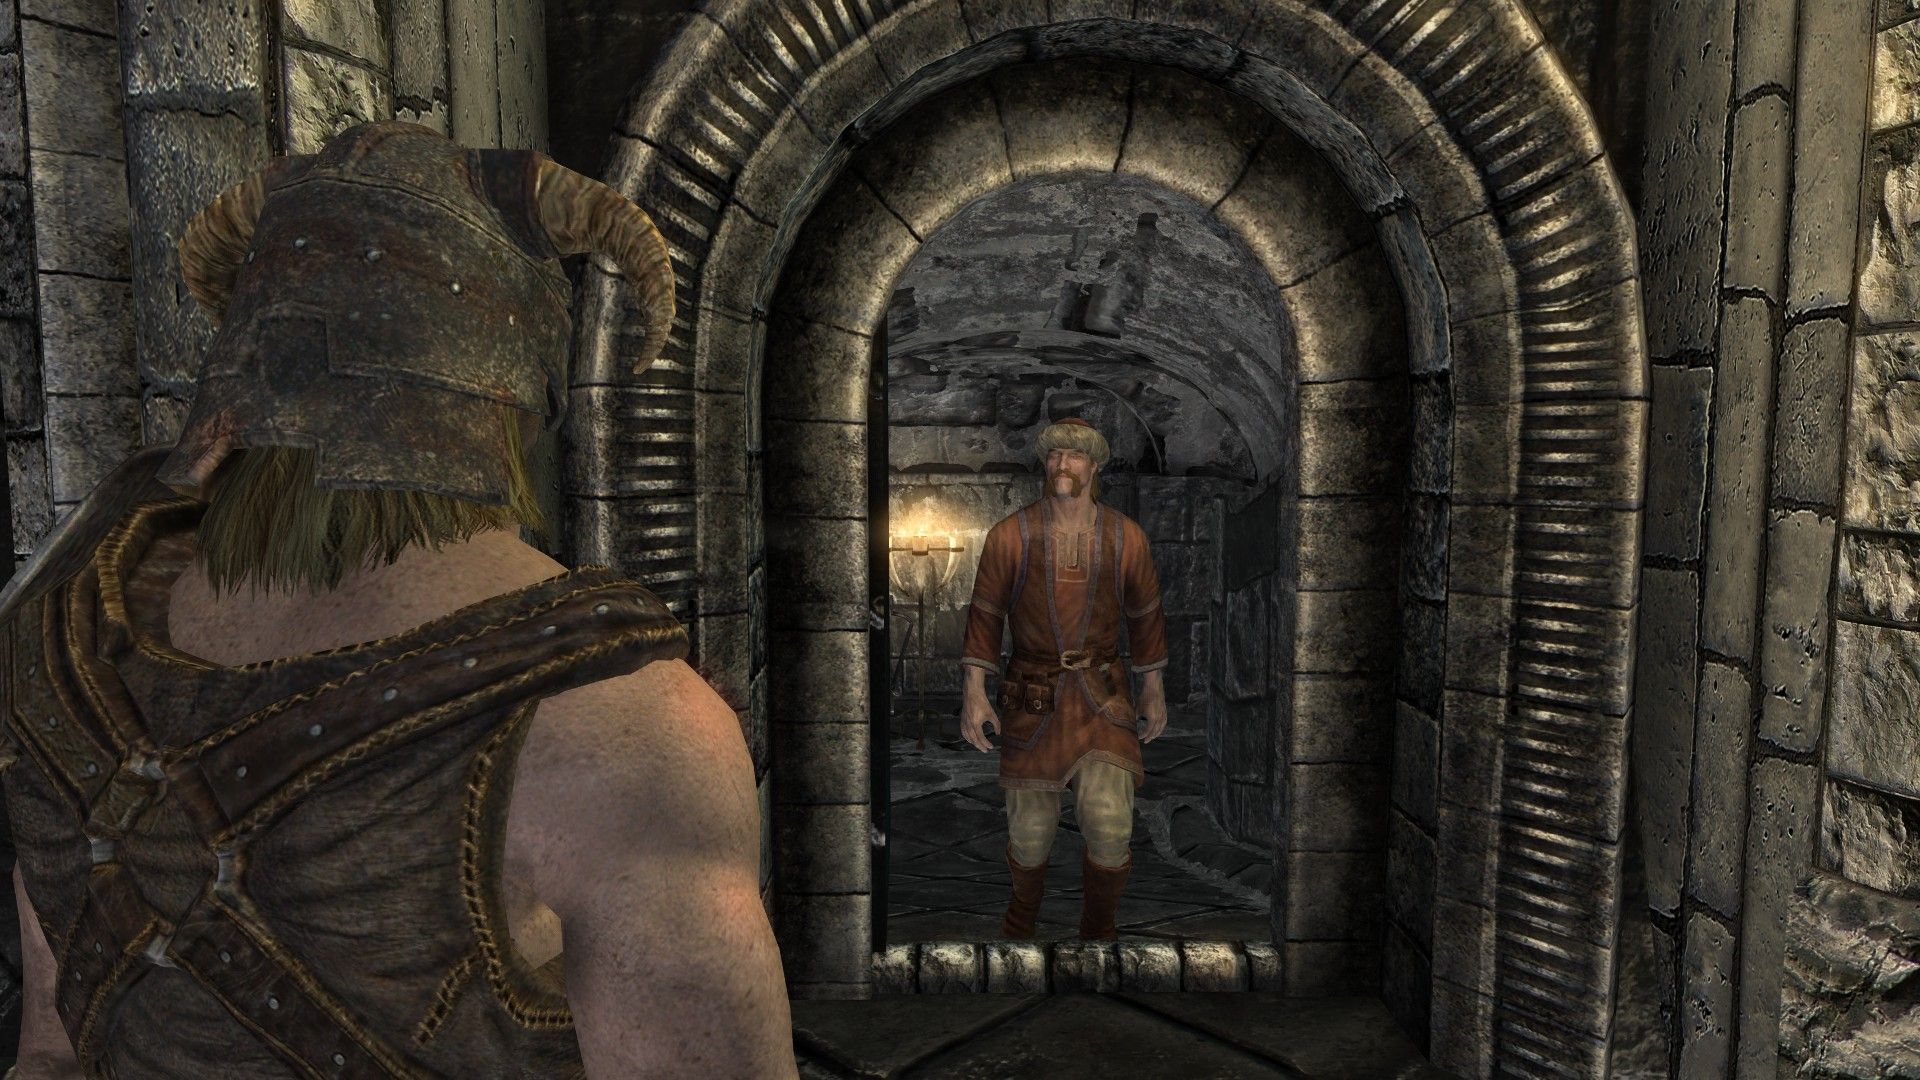 A well-dressed man wearing red clothes emerges from a stone tunnel inside a castle.